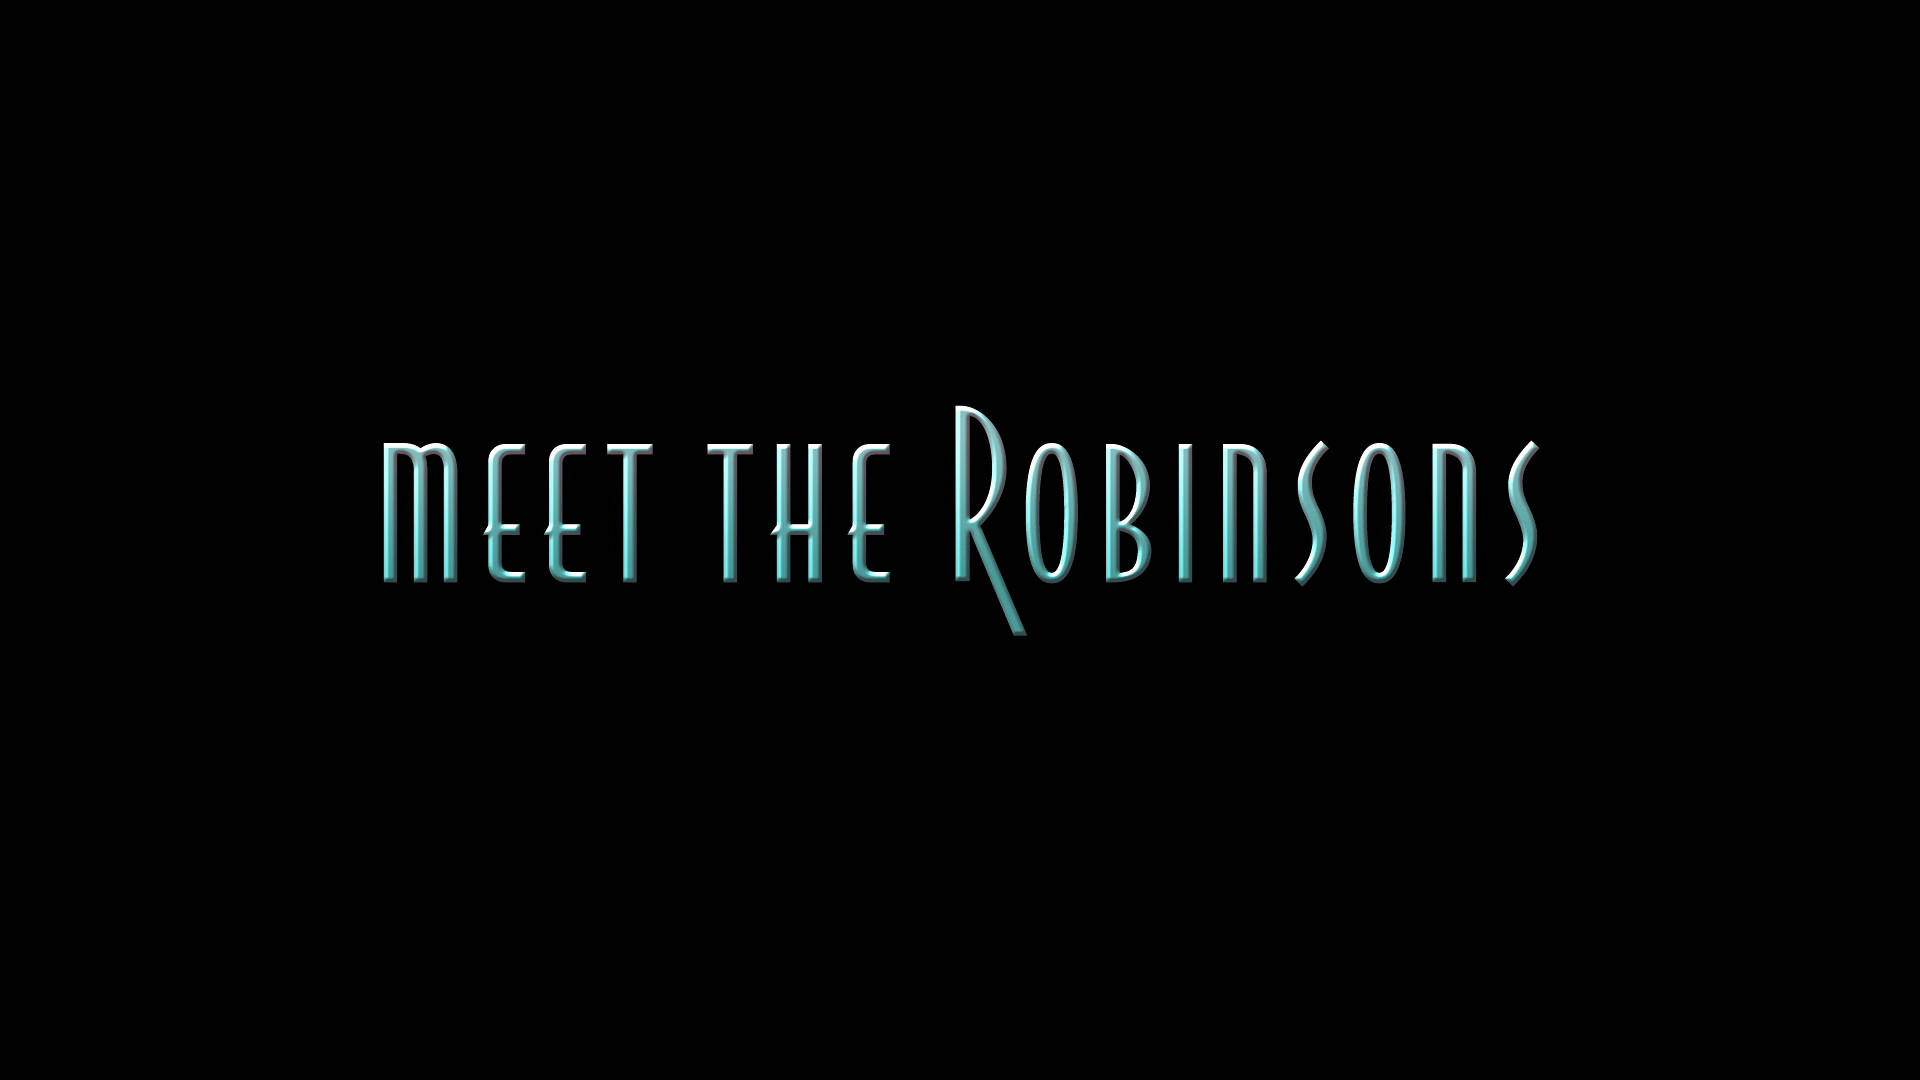 Meet The Robinsons Typography Wallpaper